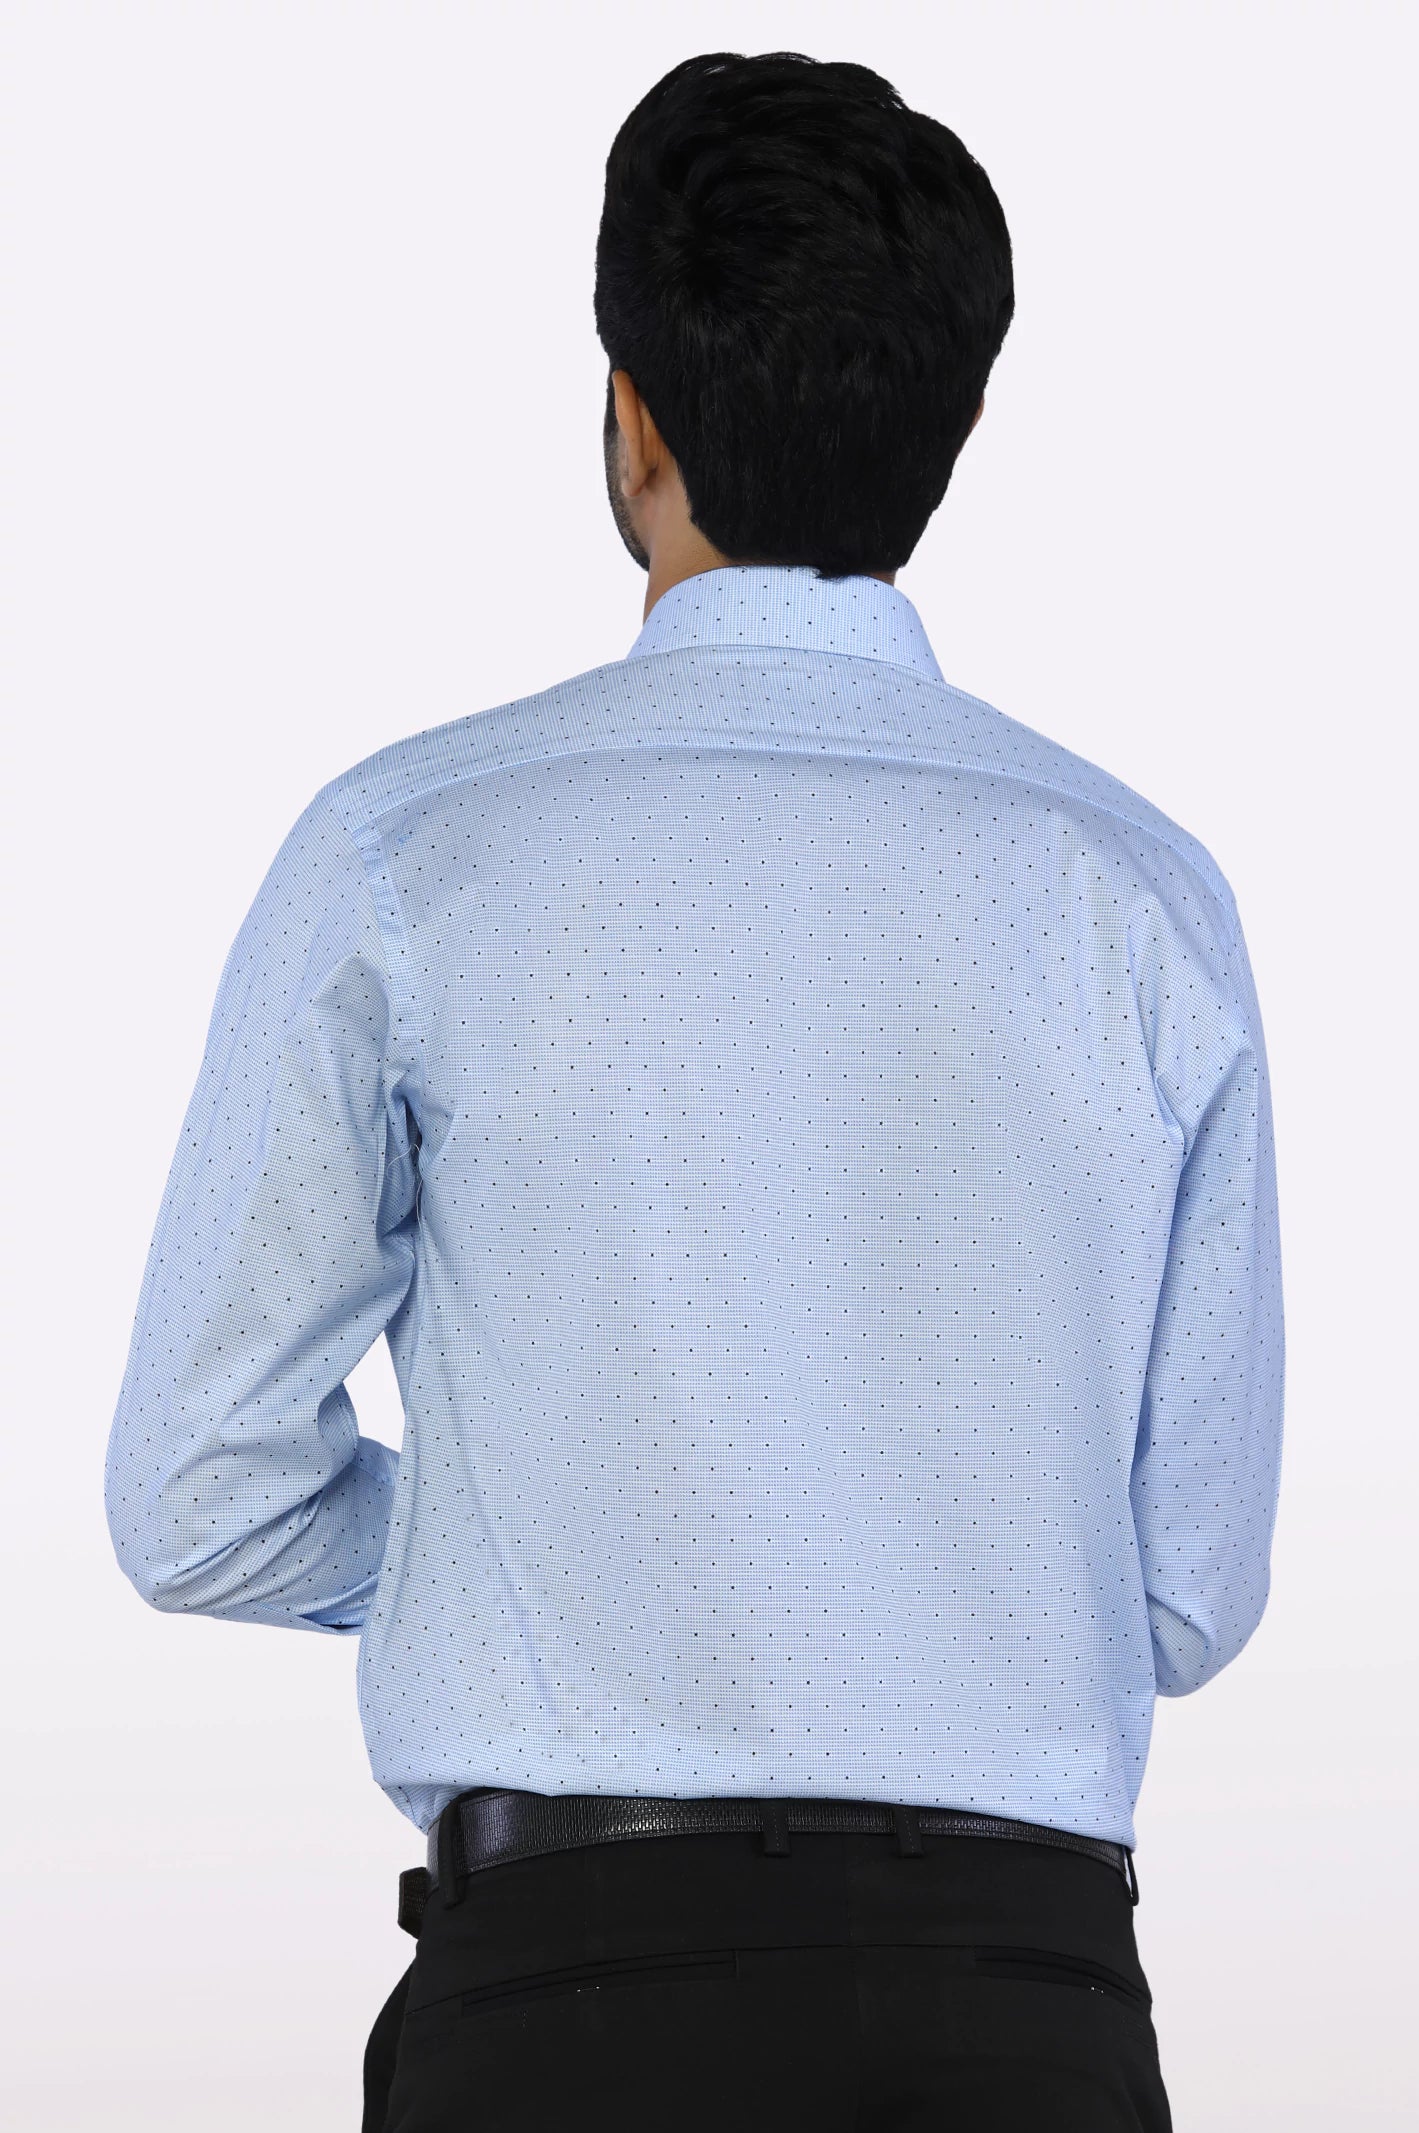 Sky Blue Dotted Formal Shirt From Diners